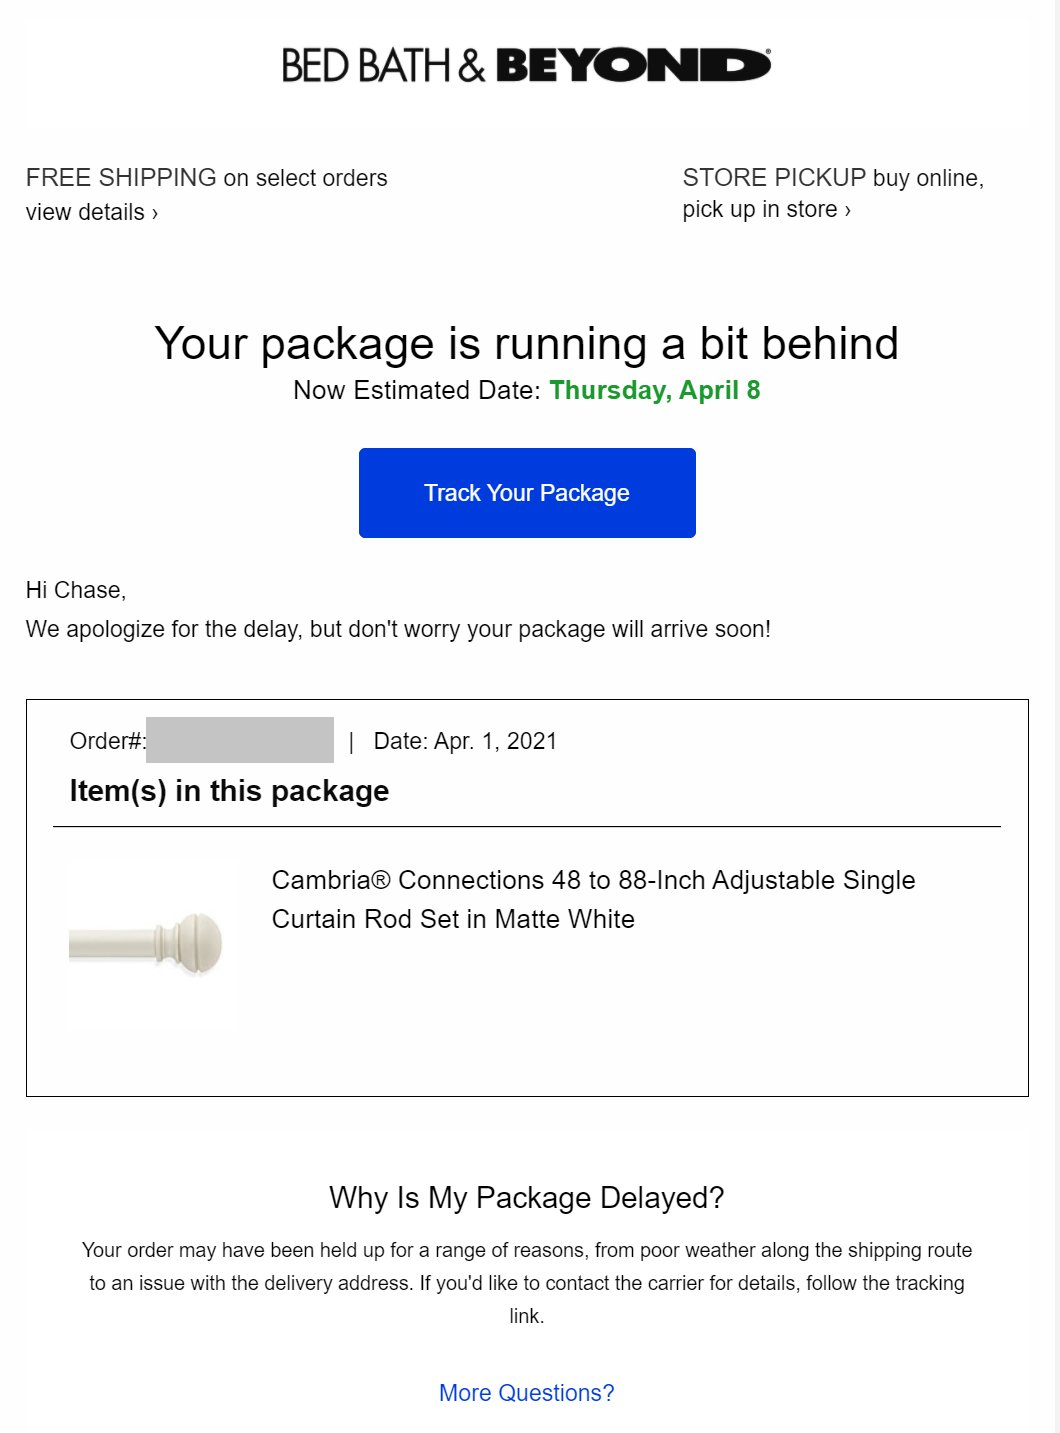 Bed Bath & Beyond Delayed Shipment Notification Email Template screenshot